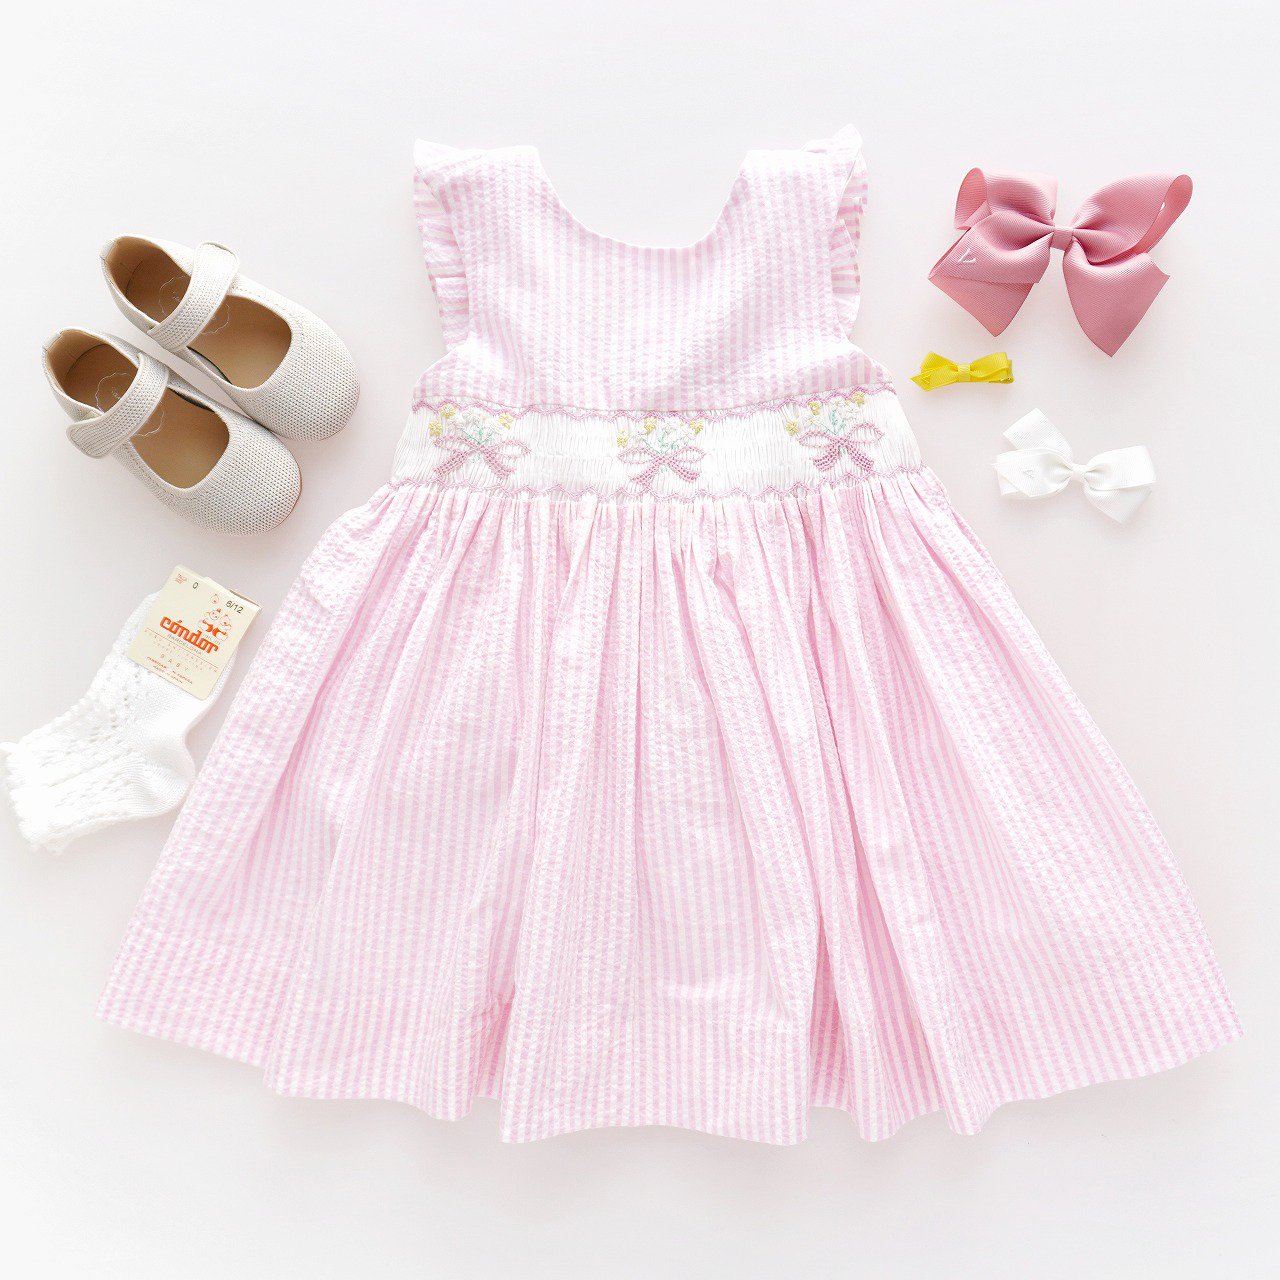 <img class='new_mark_img1' src='https://img.shop-pro.jp/img/new/icons1.gif' style='border:none;display:inline;margin:0px;padding:0px;width:auto;' />Kidiwi - Begonia dress (Pink stripes)